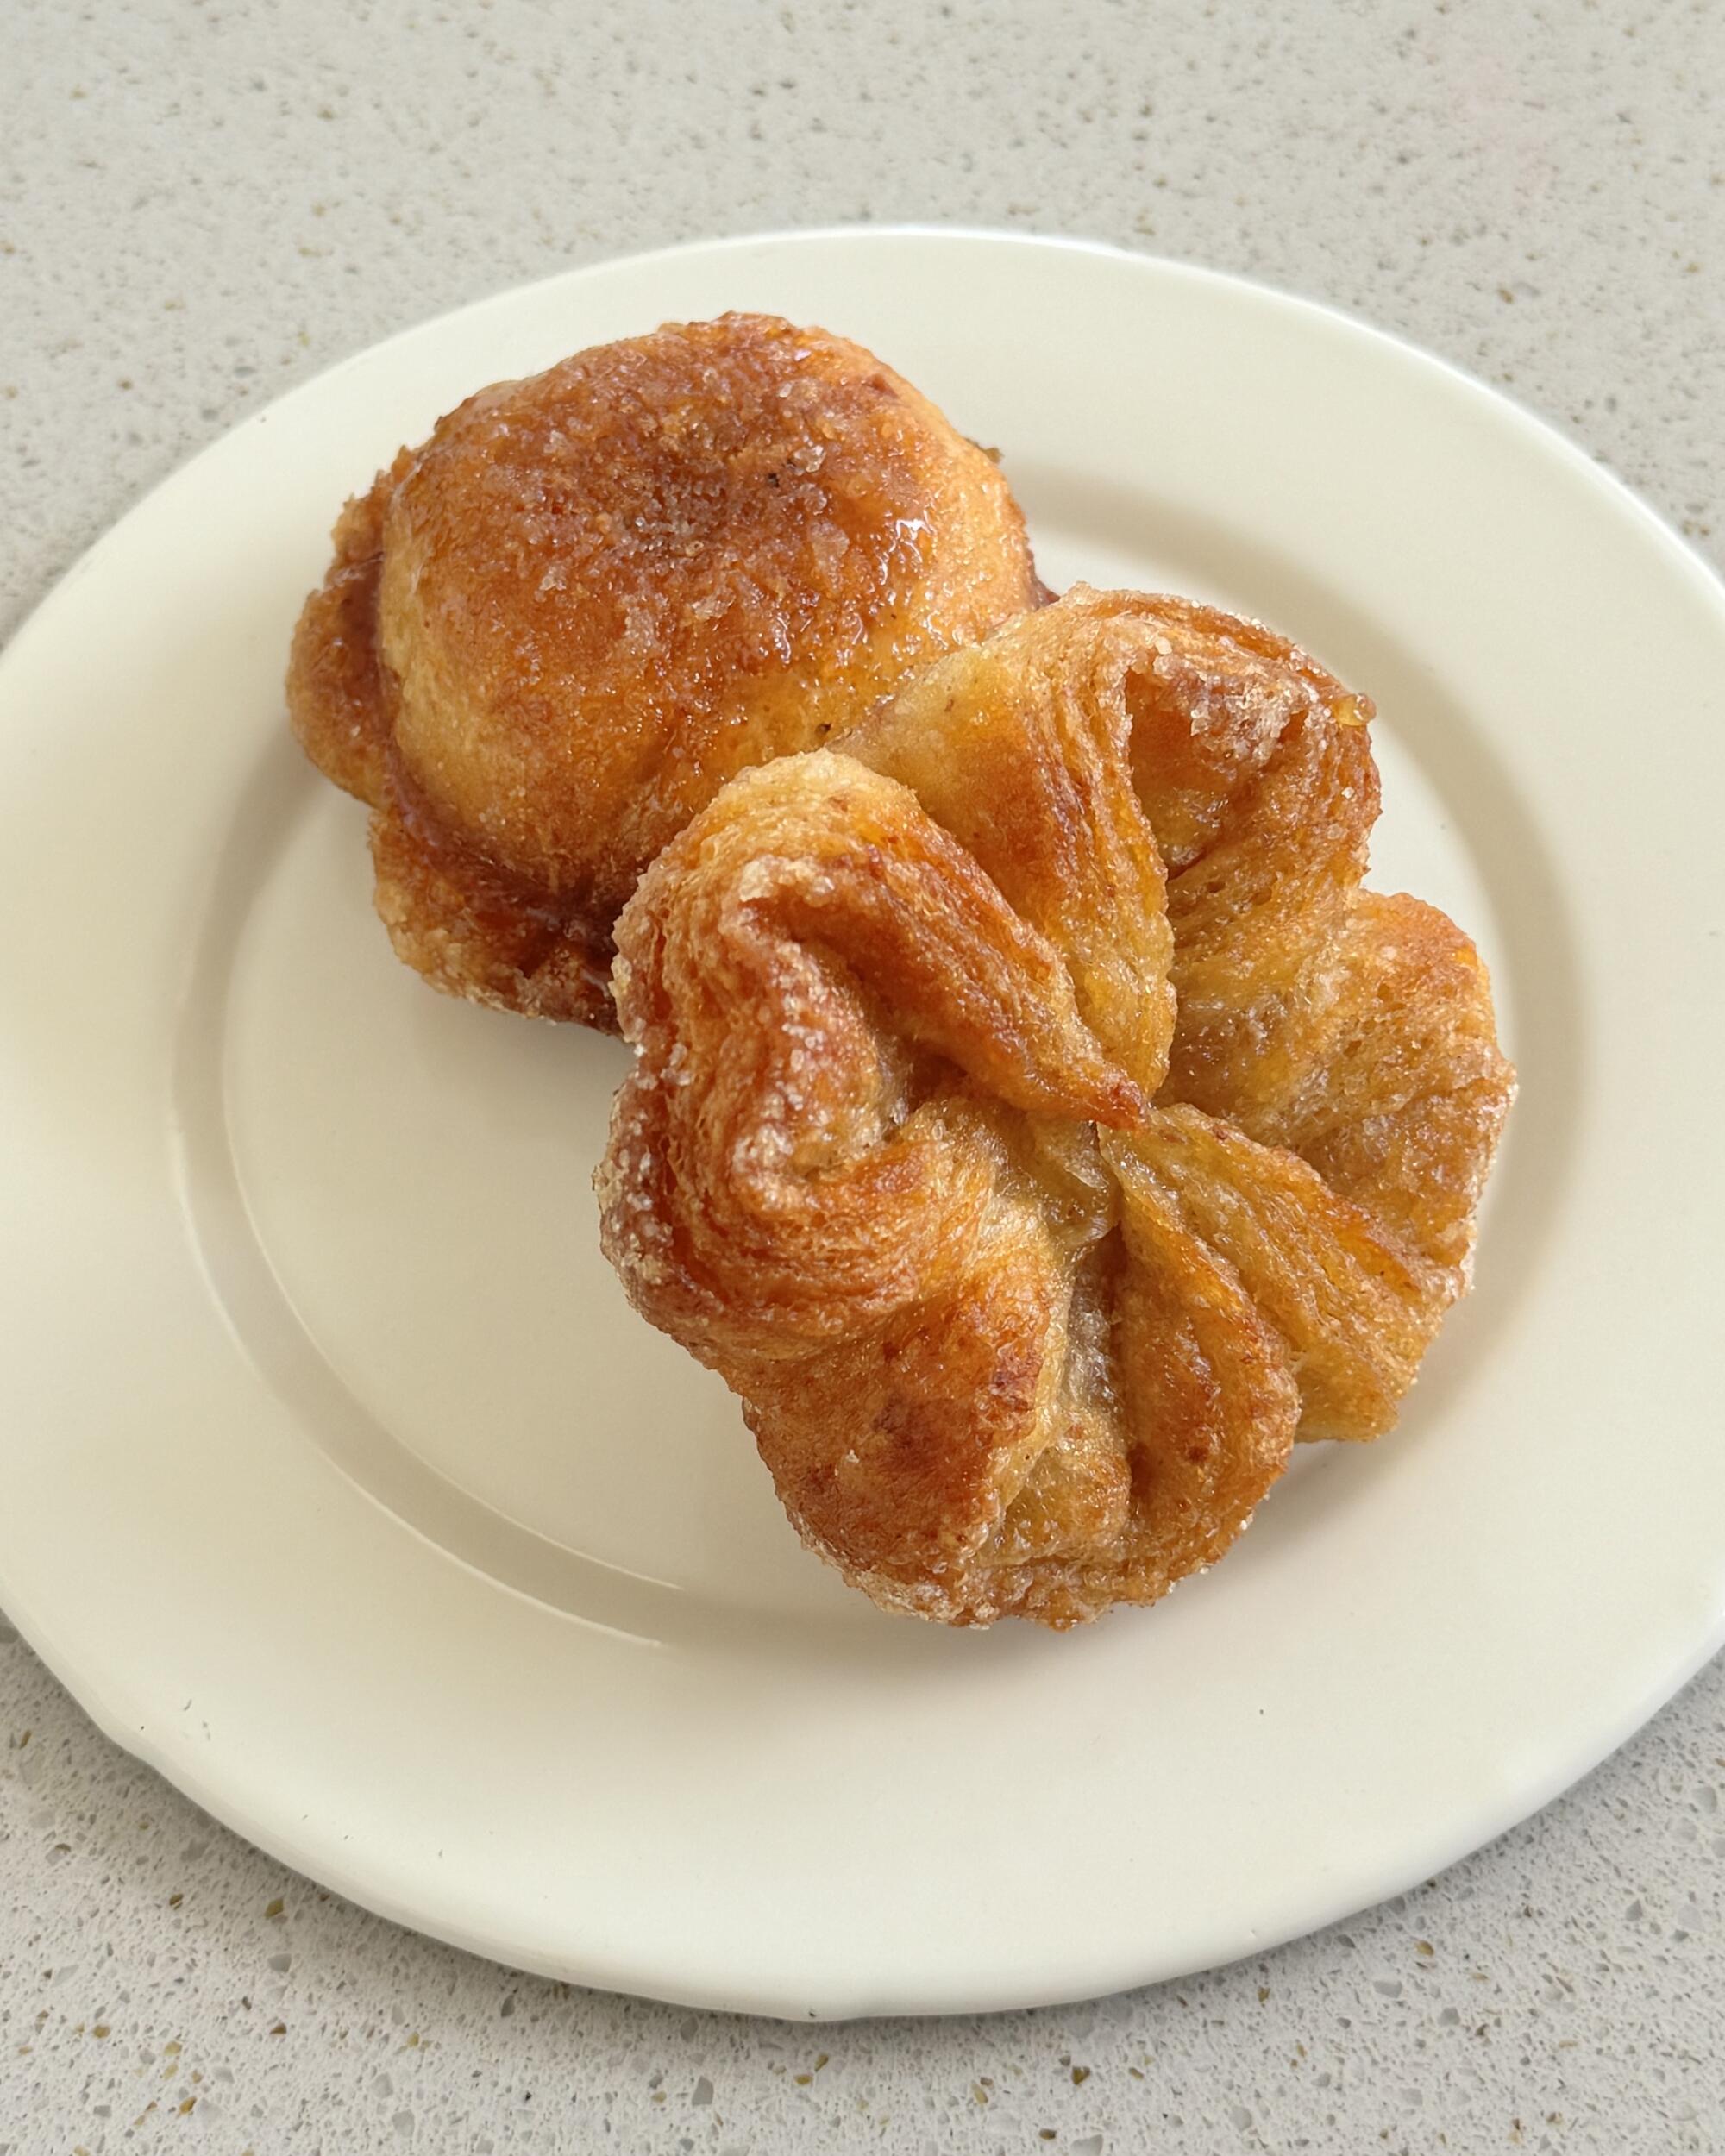 A pastry made with masa.